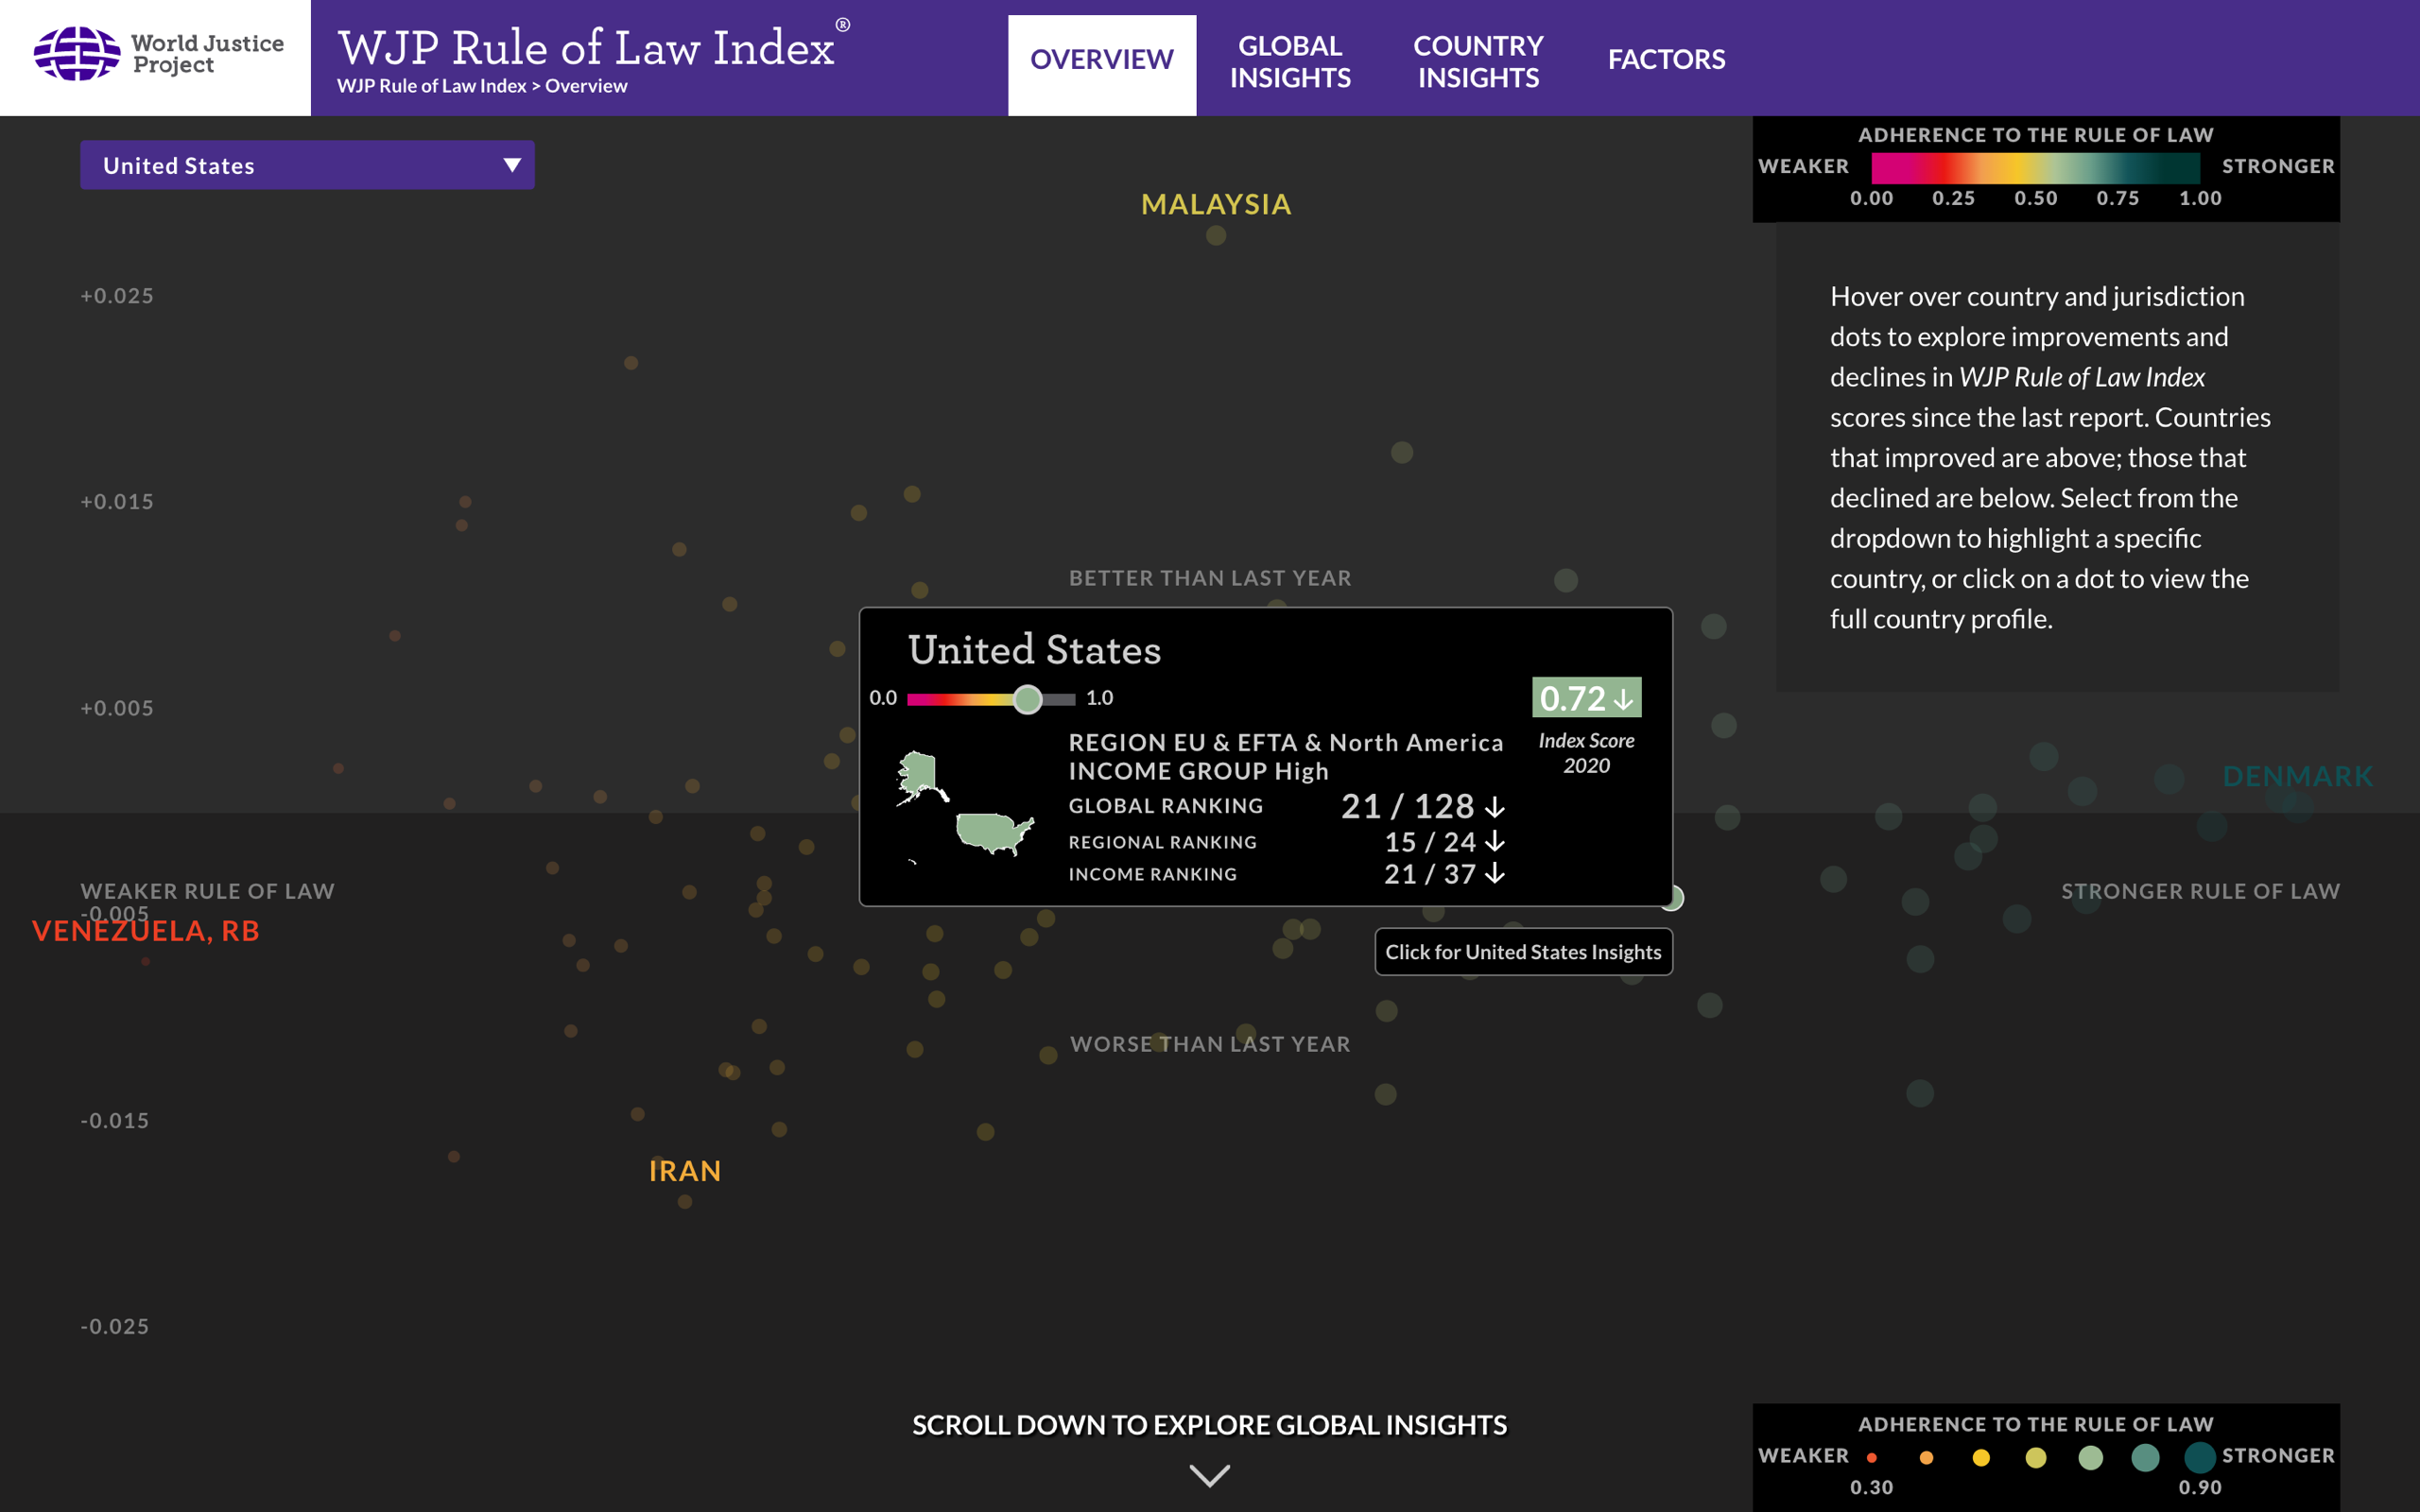 The Rule of Law Interactive Experience #8